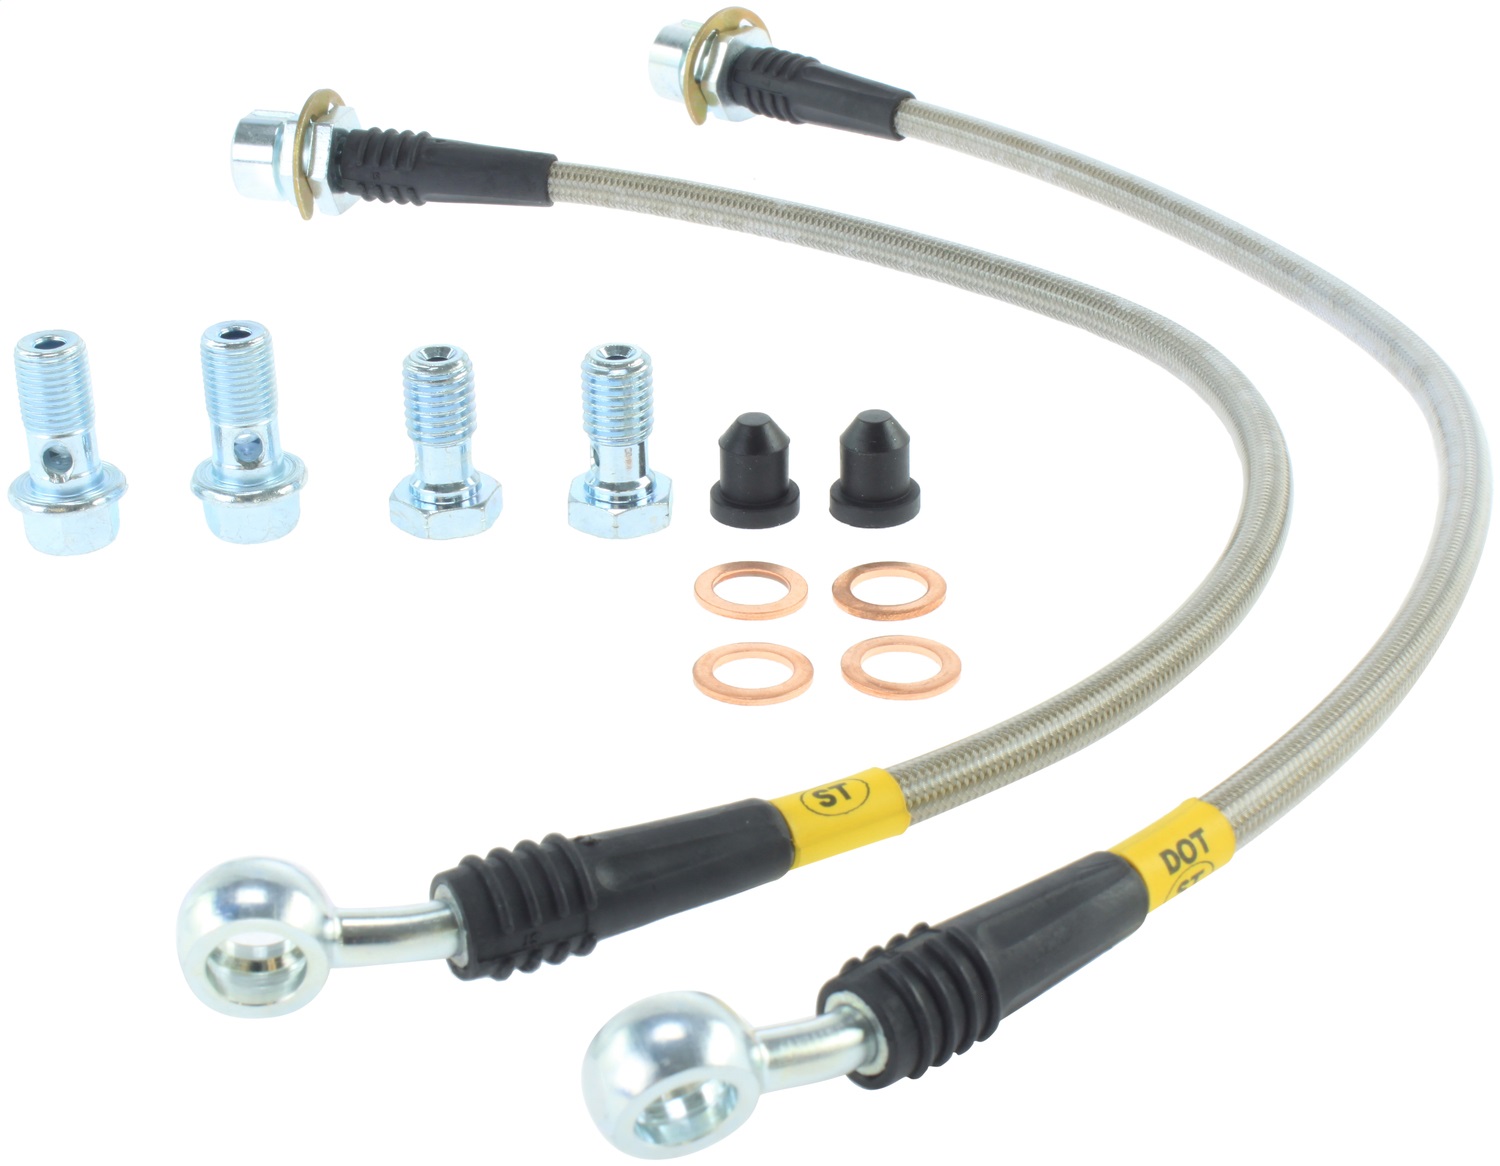 StopTech 950.61001 Stainless Steel Hose Set Fits 94-04 Mustang